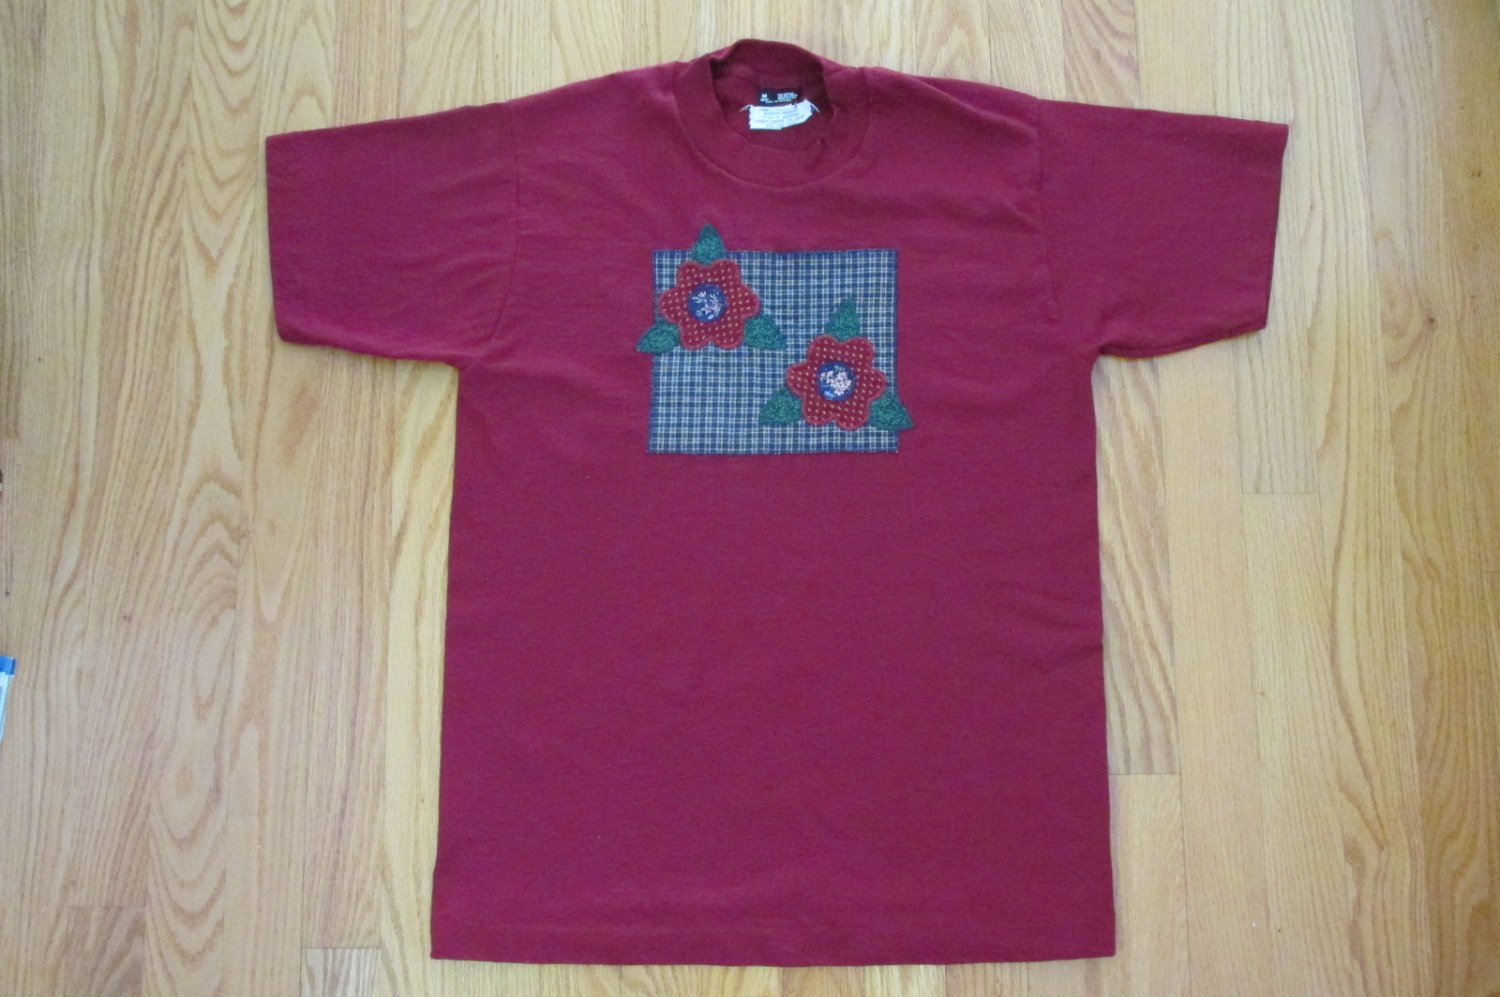 FRUIT OF THE LOOM WOMEN'S SIZE M T SHIRT BURGUNDY W APPLIQUE CALICO QUILT THEME FLOWERS